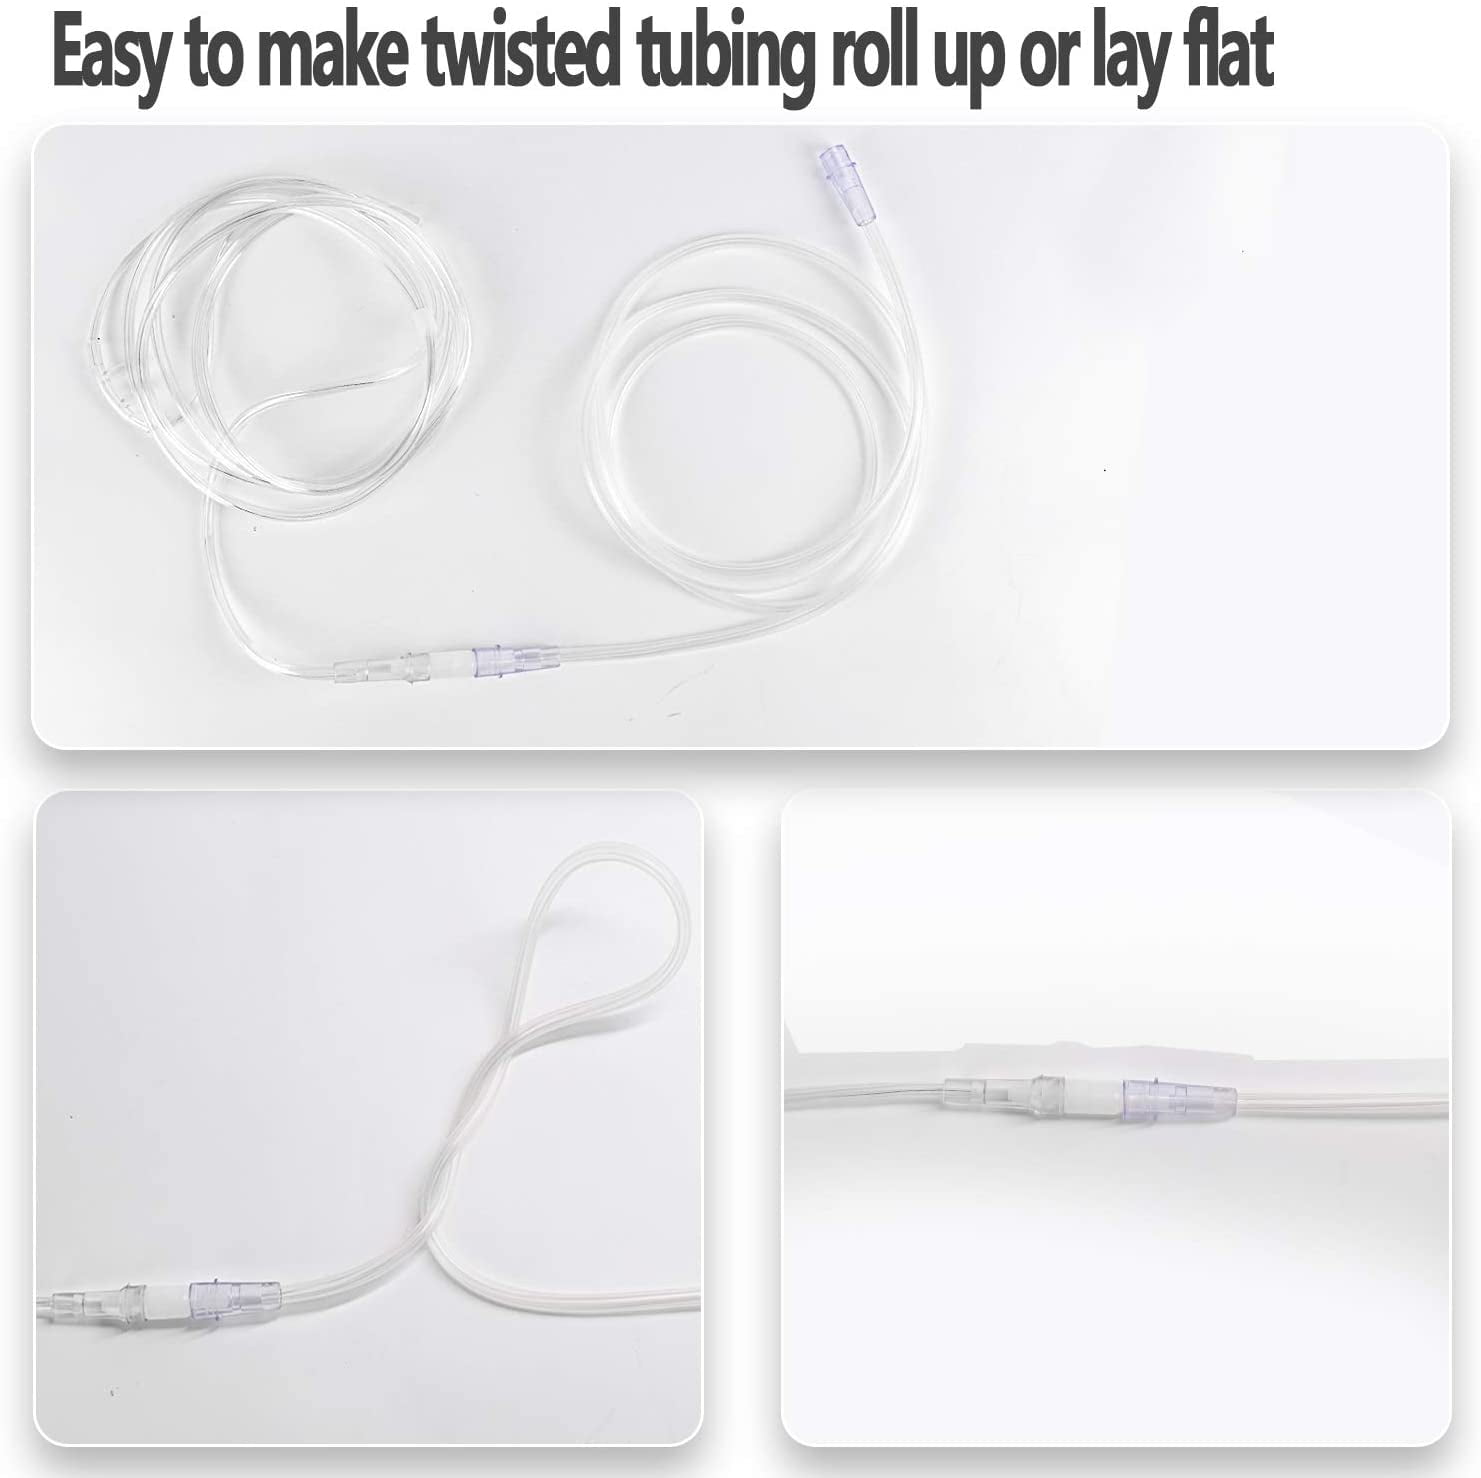 5 Packs Oxygen Tubing Swivel Connectors,Cannula Connectors,Kink-Resistant  and Avoid Tangling